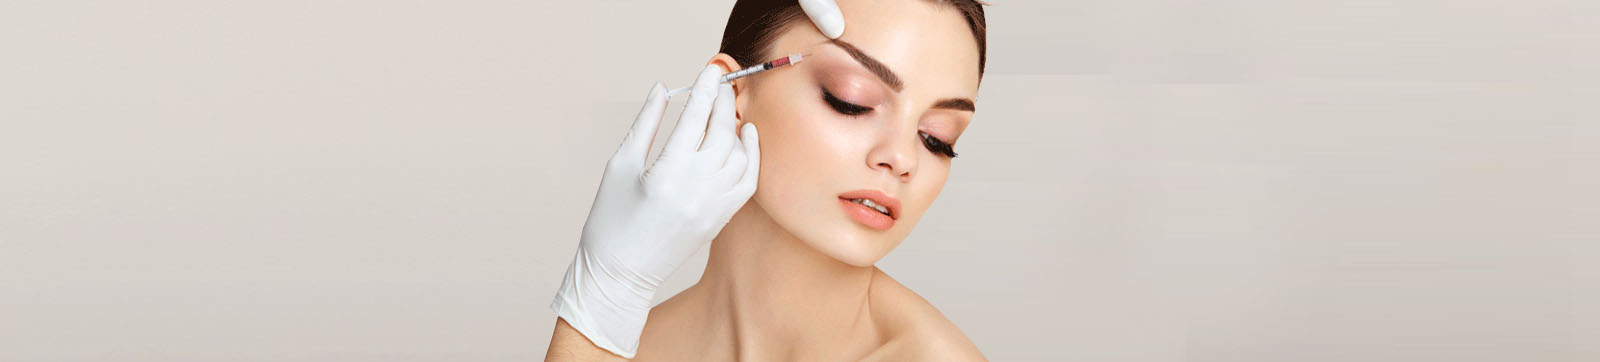 botox clinic in delhi, Prp treatment for acne scars, Microdermabrasion treatment cost in delhi, Best wrinkle filler for lines around mouth in rajouri garden, Microneedling for acne scar in delhi, Botox lip injections in rajouri garden